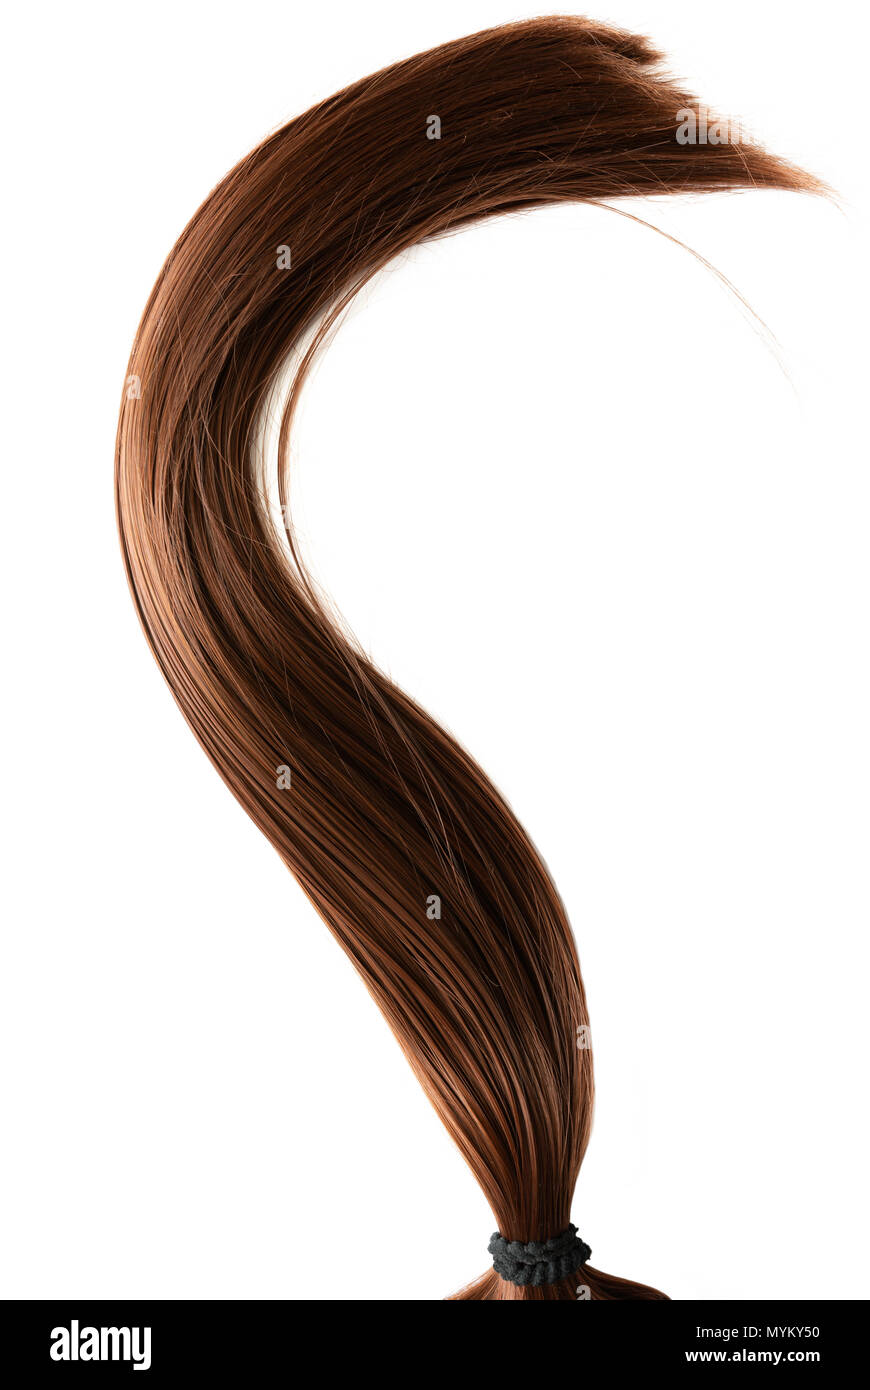 long healthy straight brown hair ponytail isolated on white background Stock Photo